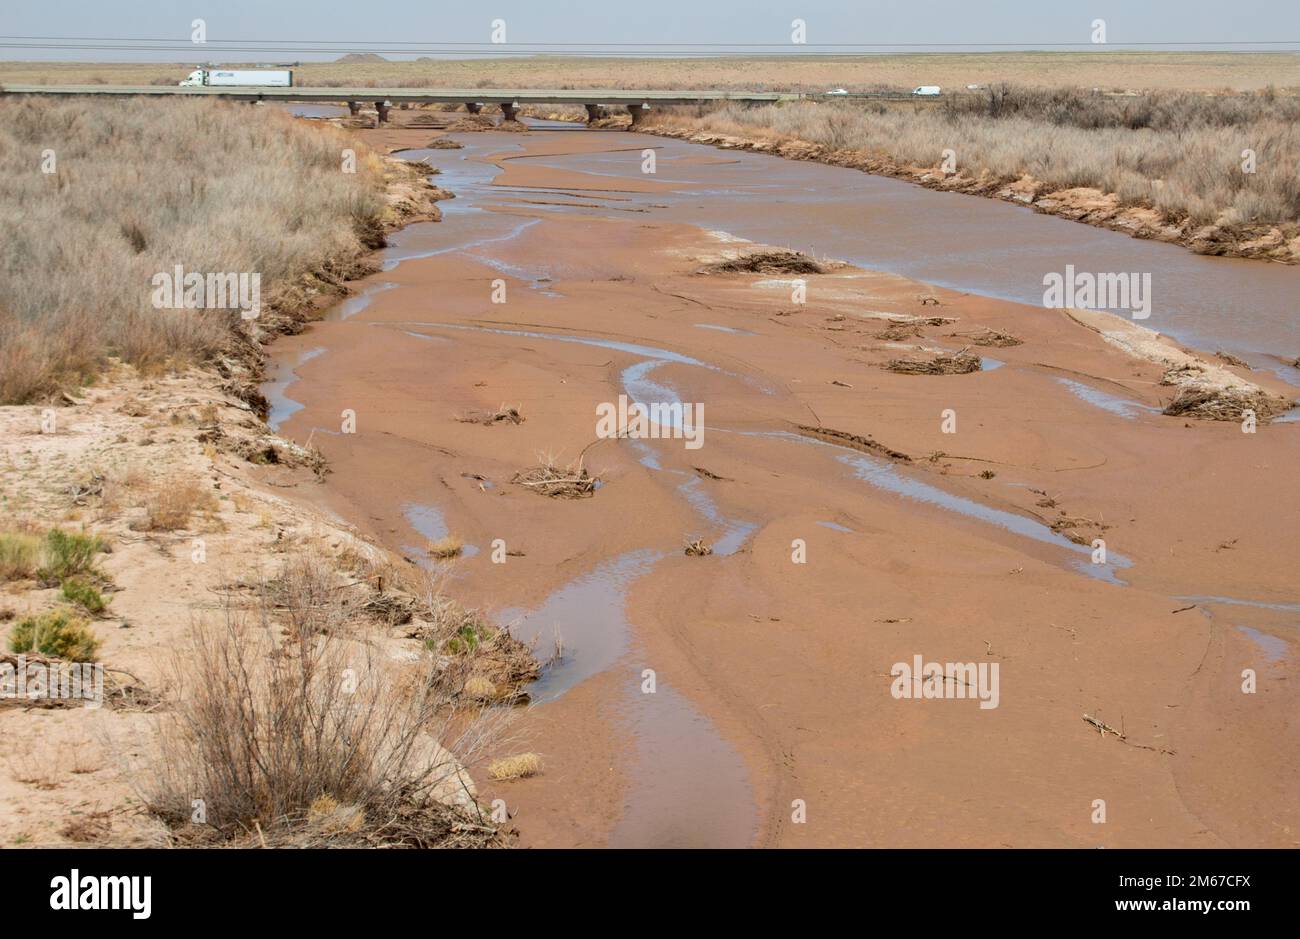 The Little Colorado River flows underneath bridges at mile marker 345 April 11 in Winslow, Ariz. Salt cedar, an invasive plant species along the banks and riverbed, increases the chance and severity of fires and floods in Navajo County. Stock Photo